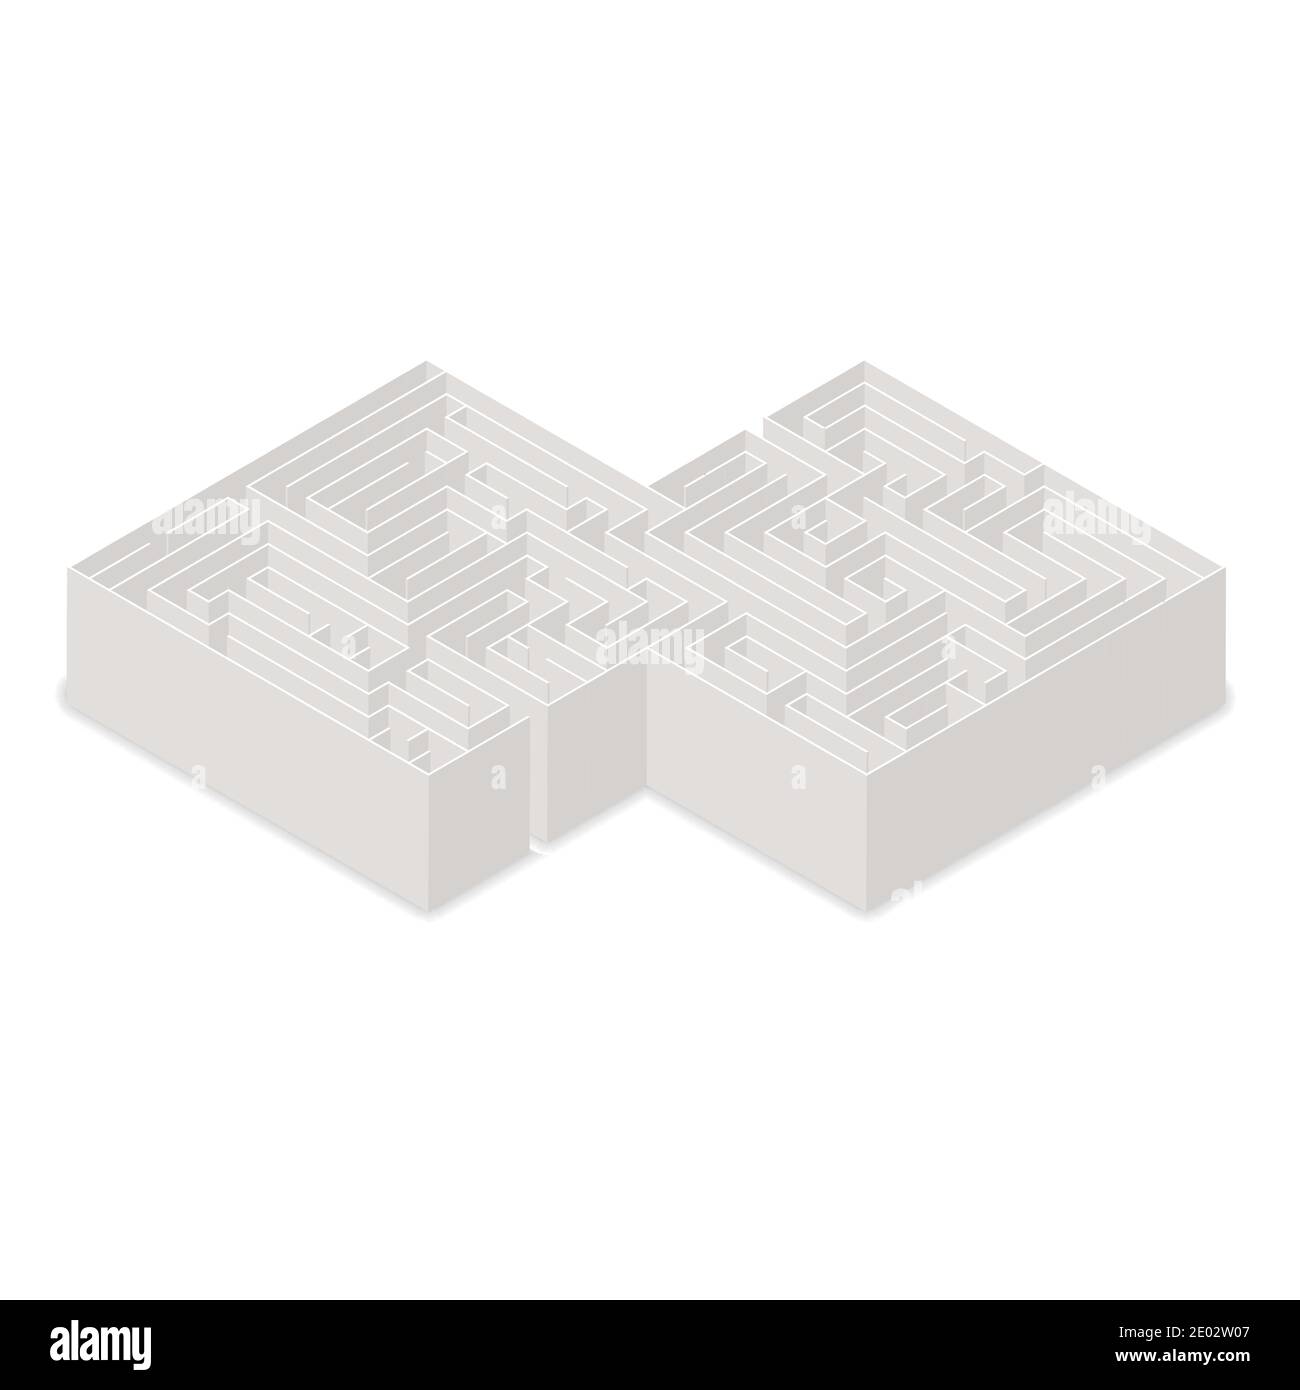 Complicated labyrinth in isometric view on white Stock Vector